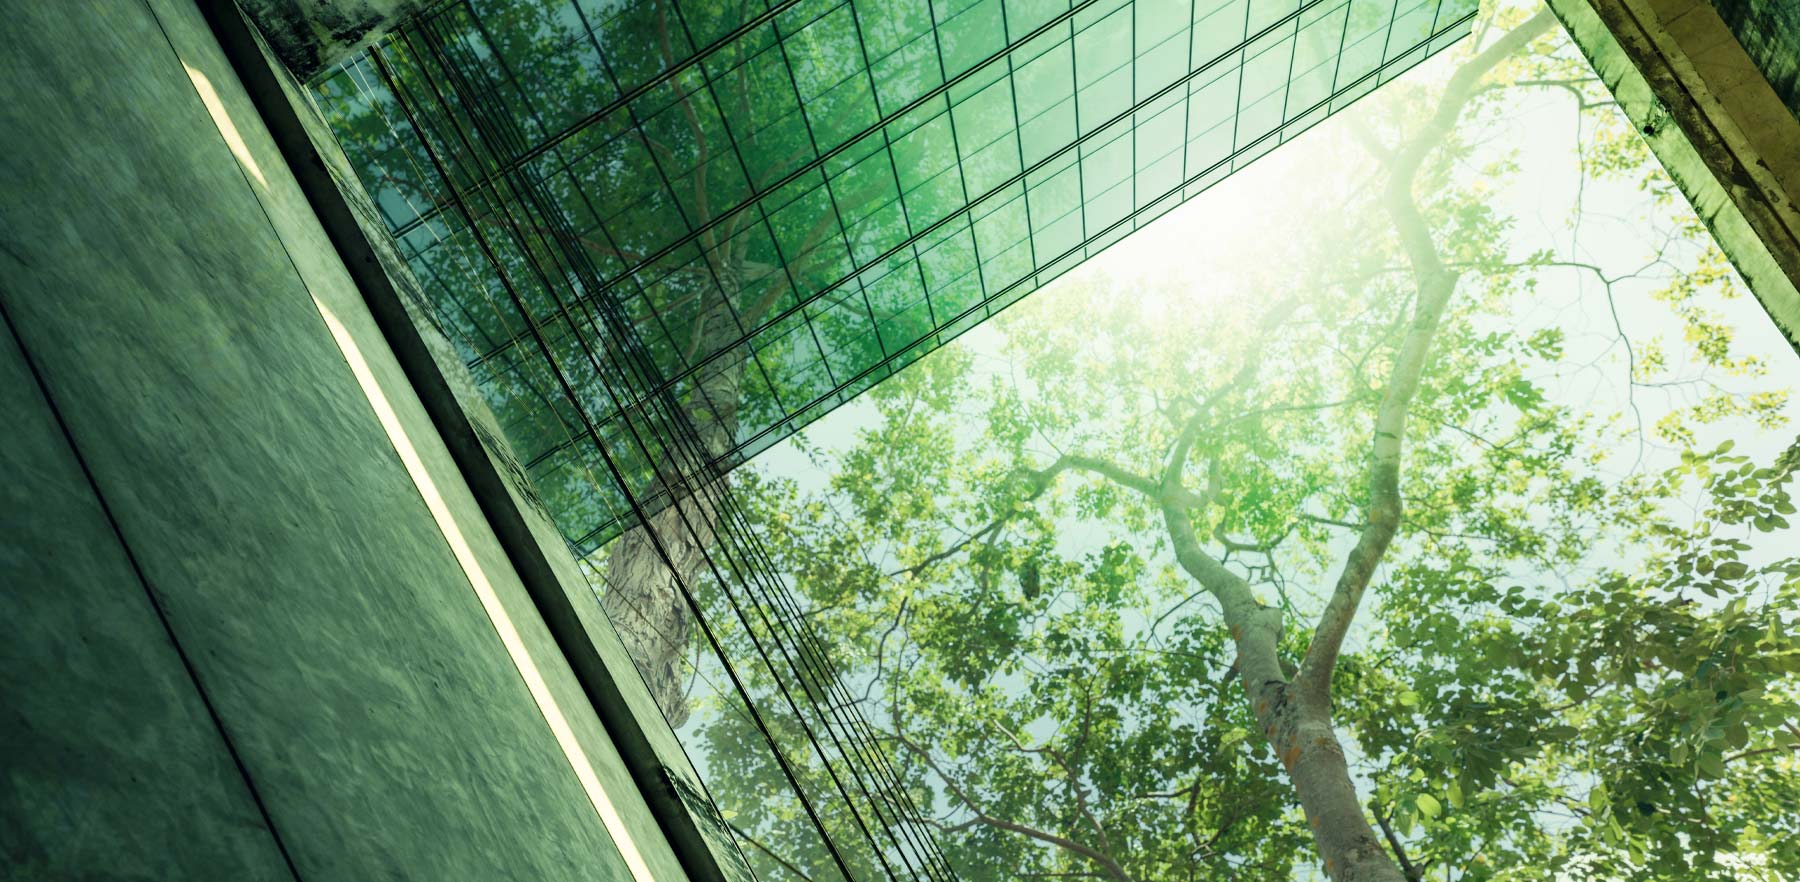 Abstract image of a building with glass windows reflecting green foliage